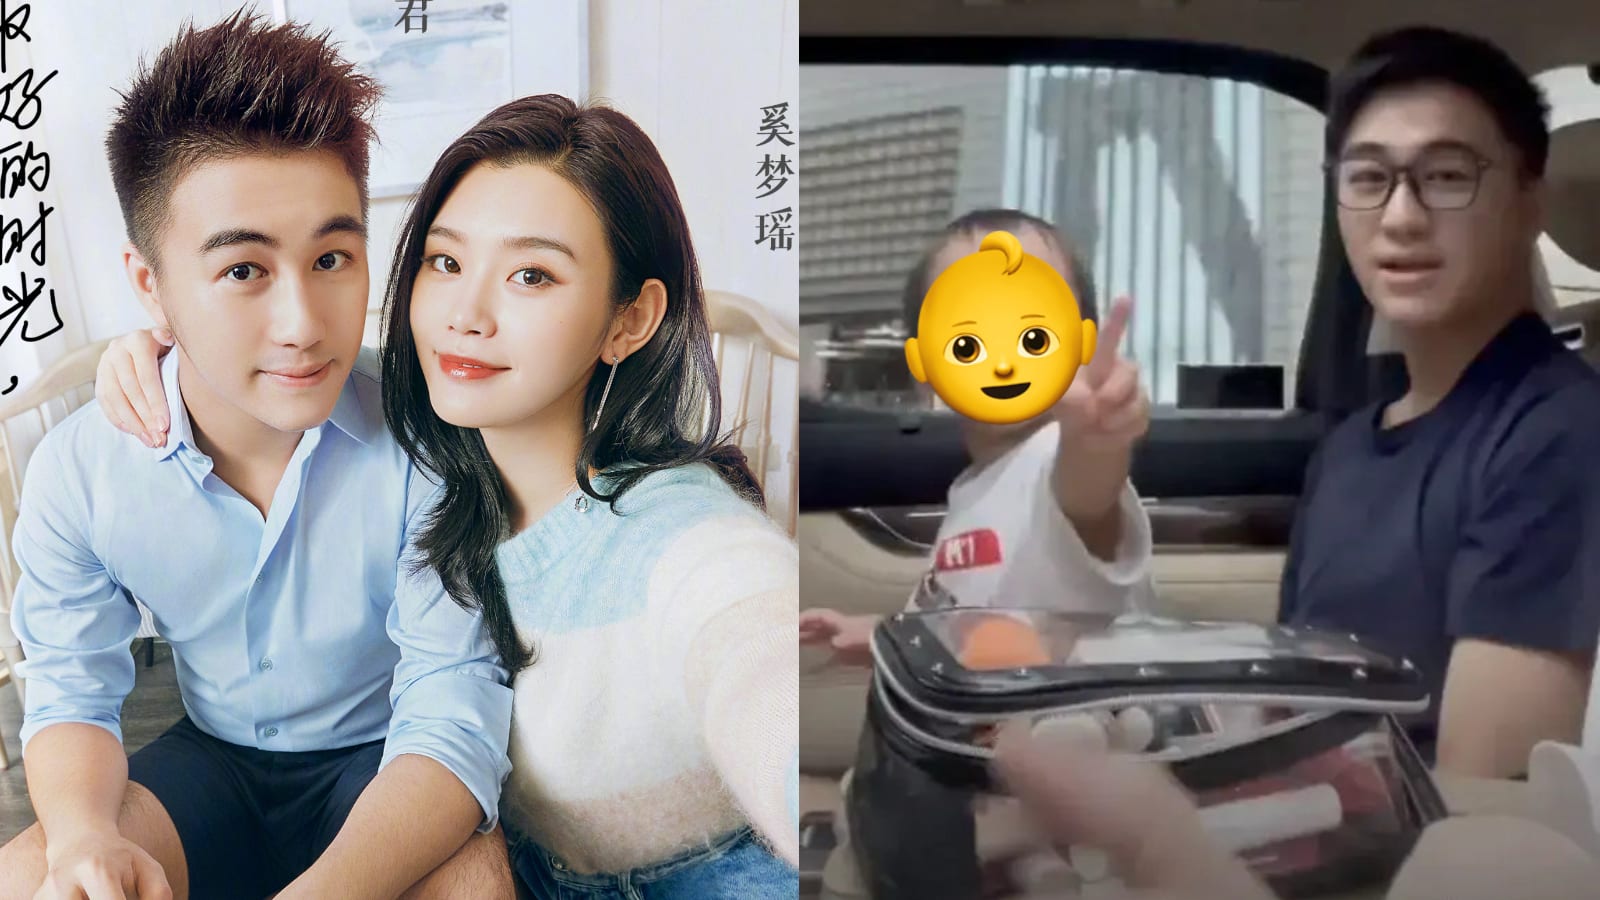 Late Casino King Son Mario Ho’s Supermodel Wife Accidentally Posts Vid That Shows Their 2-Year-Old Son’s Face